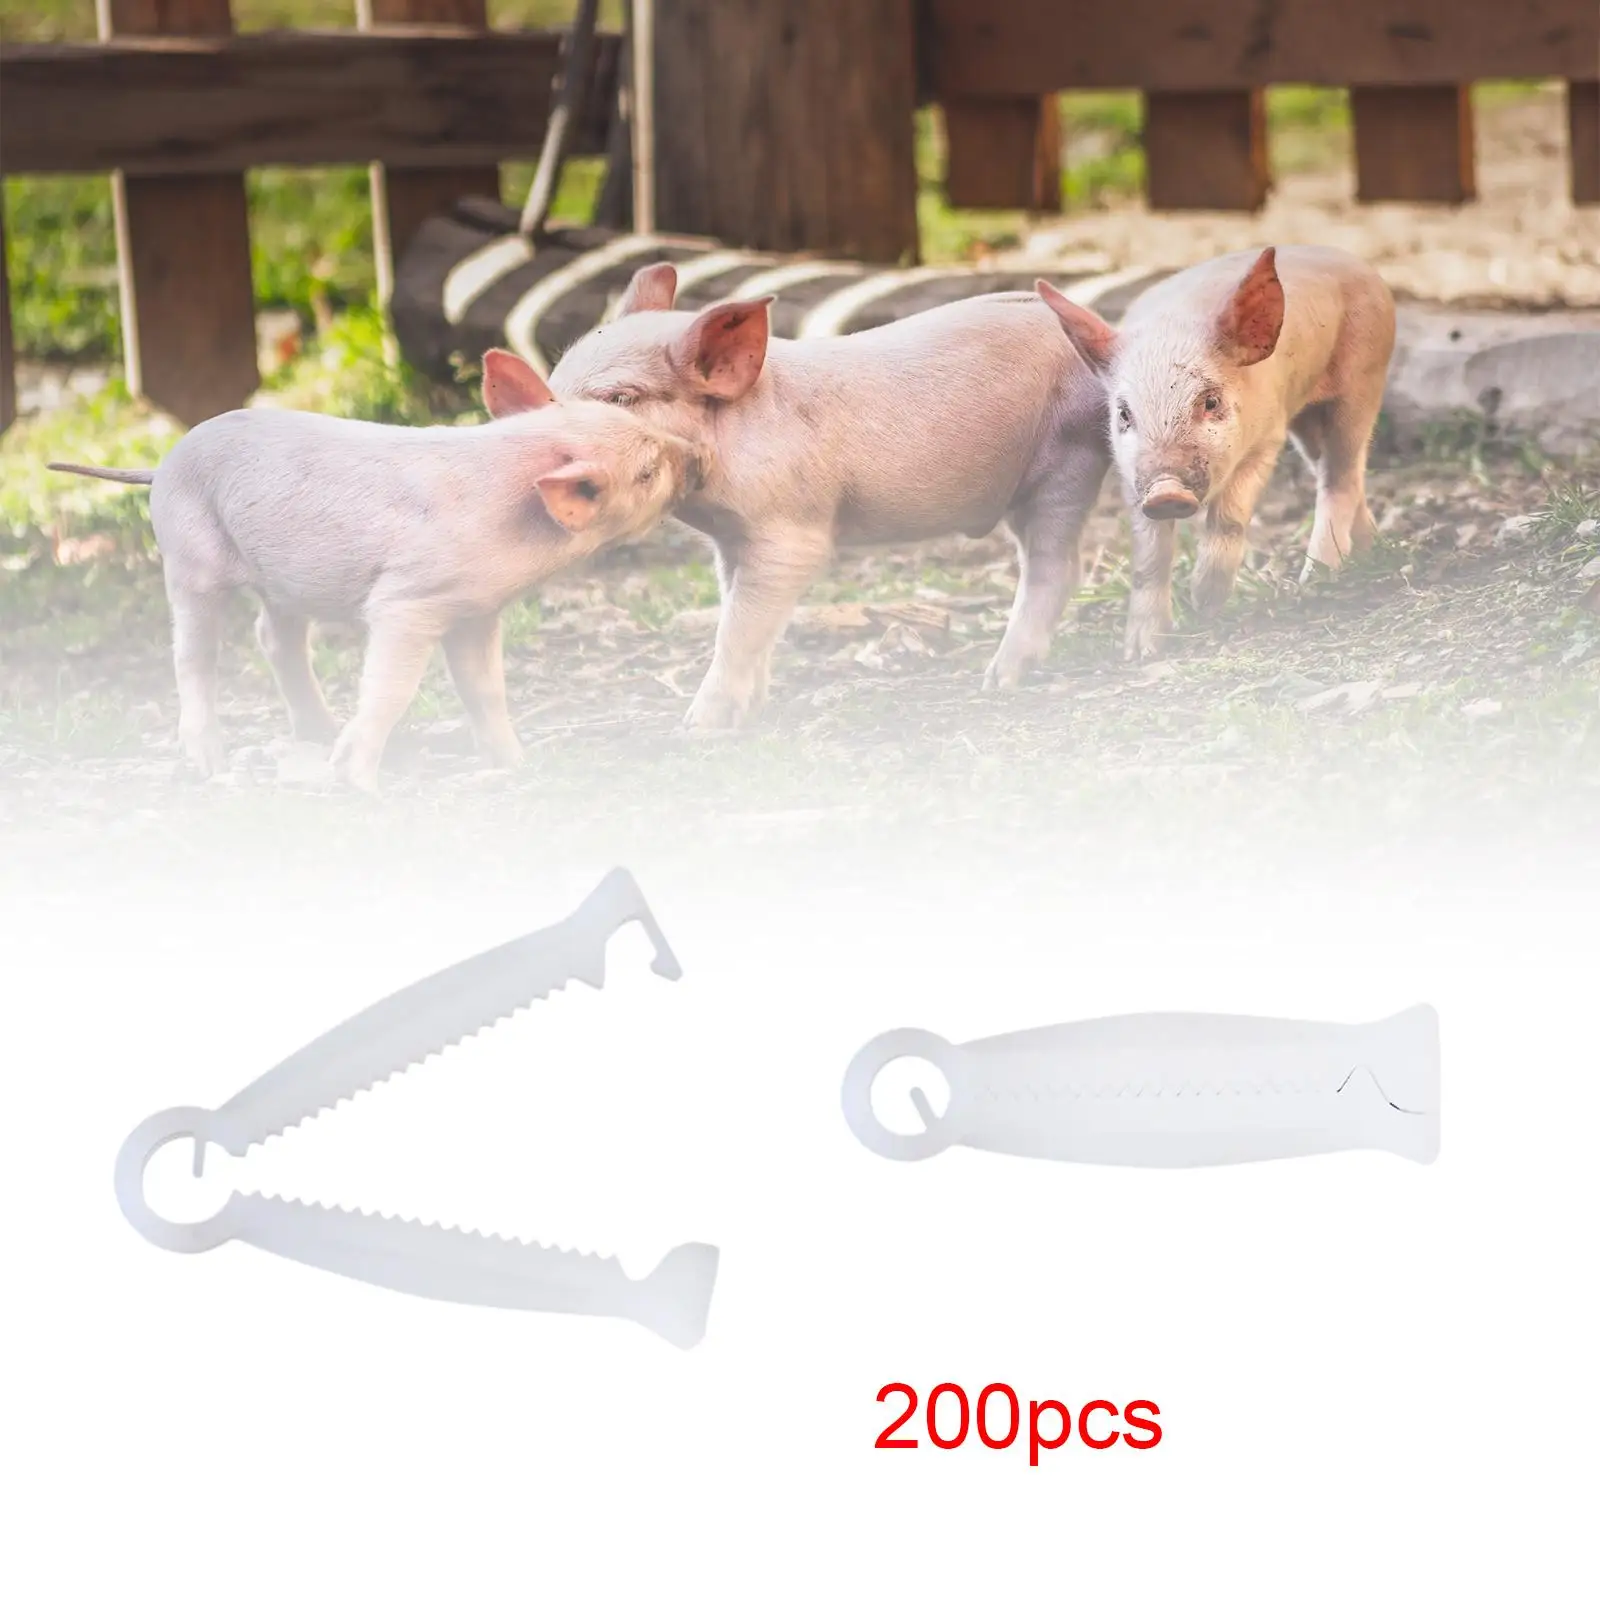 200Pcs Disposable Whelping Kits Multipurpose Portable Practical Pig Umbilical Cord Clip for sheep Sheep Cow Farming Pigs